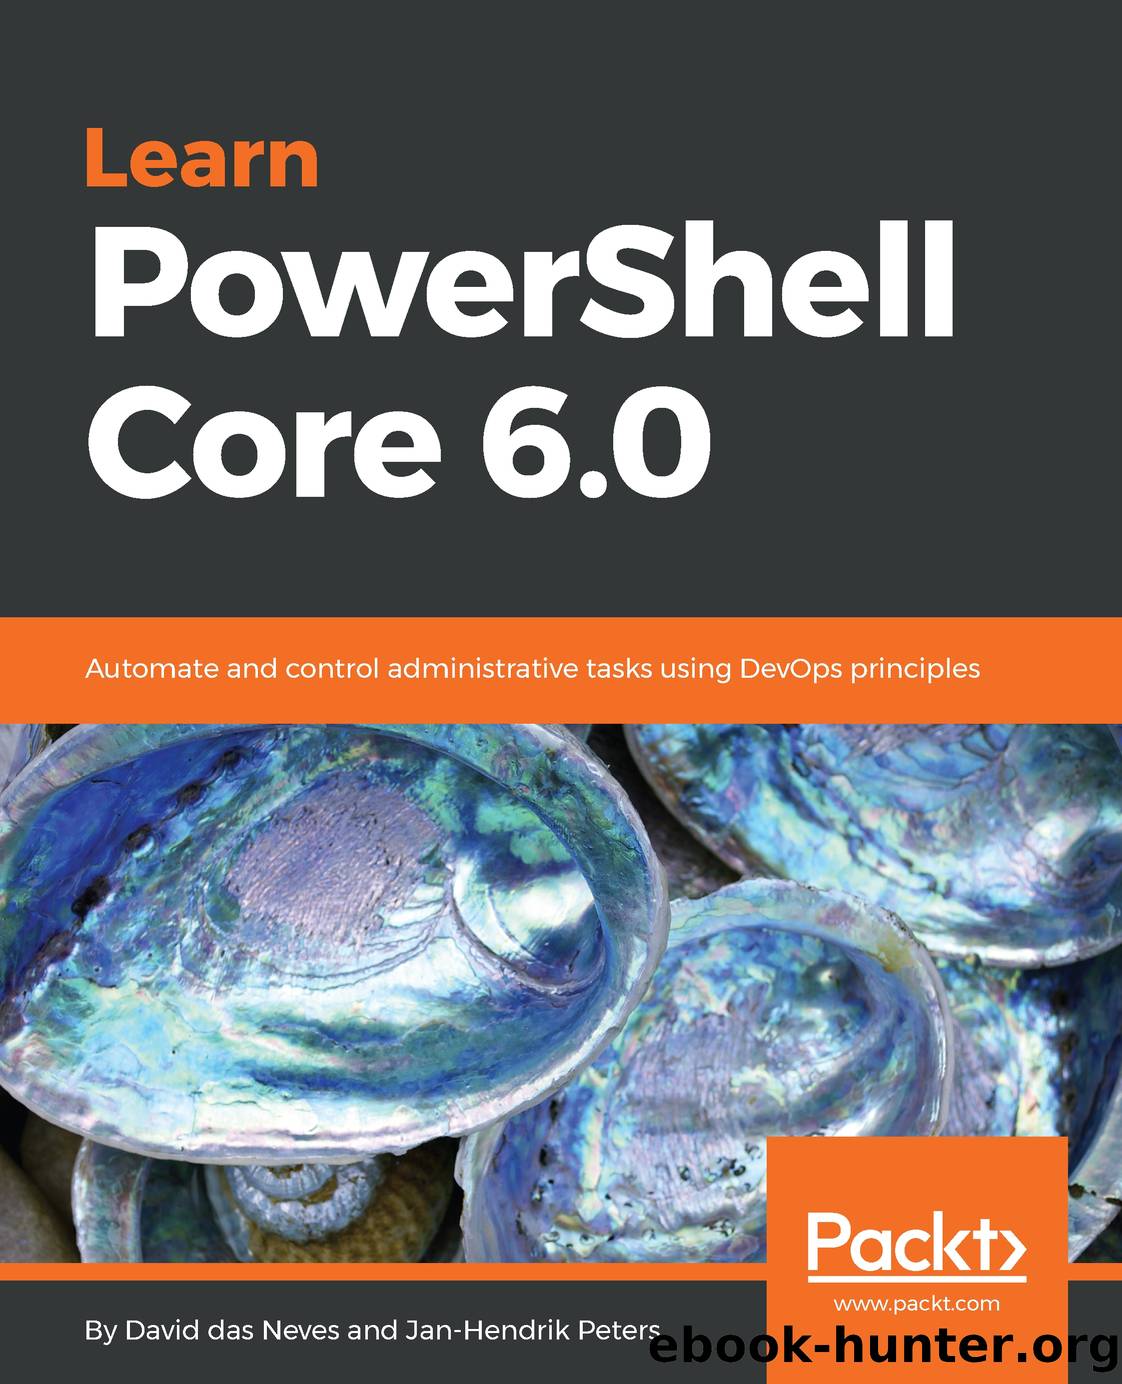 Learn PowerShell Core 6.0 by David das Neves